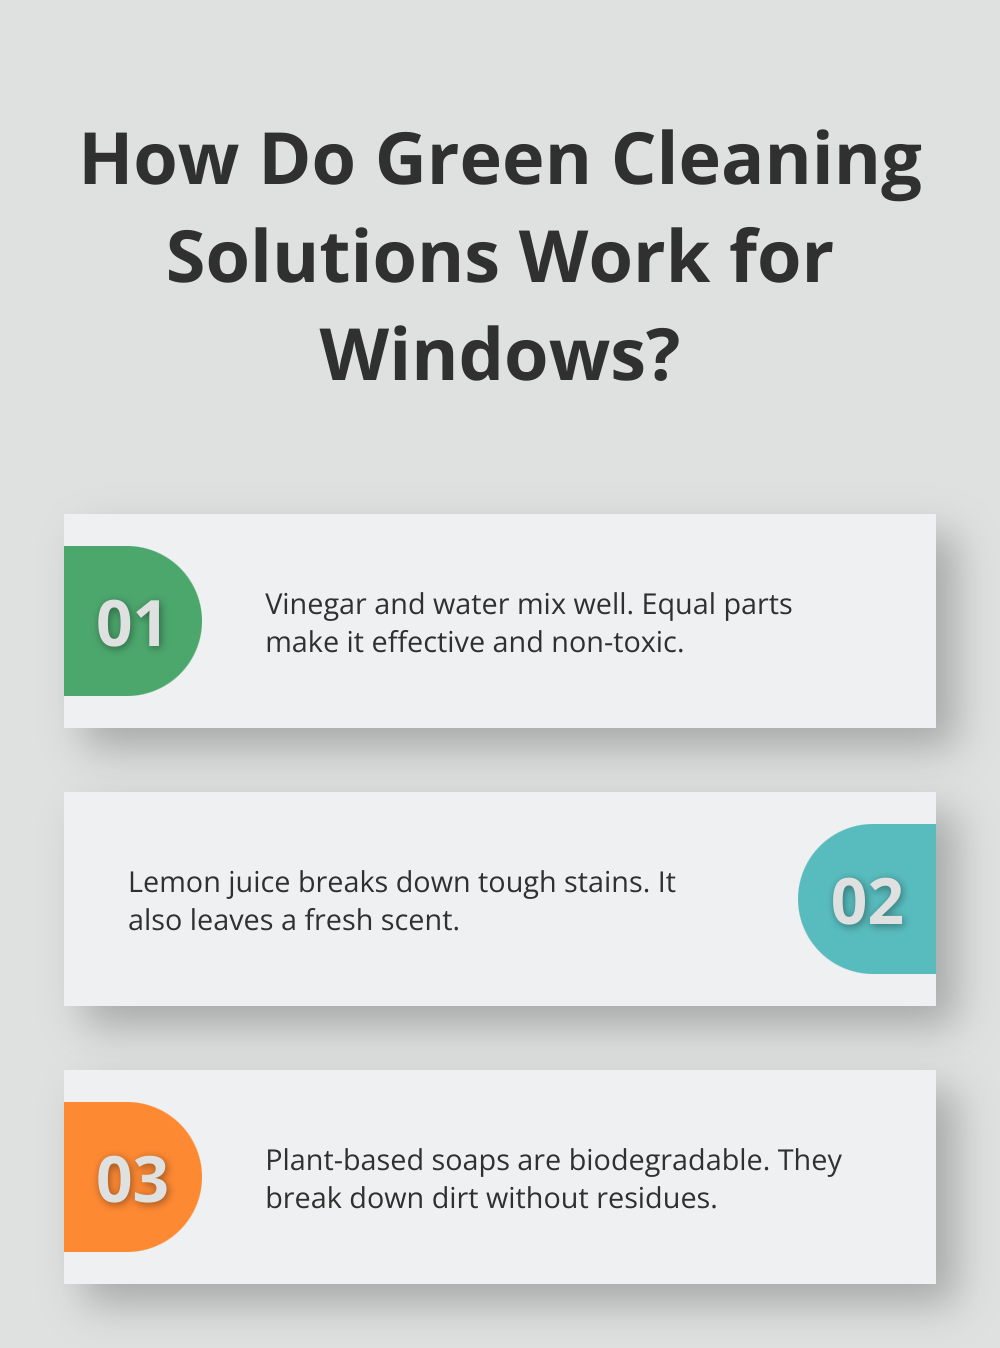 Fact - How Do Green Cleaning Solutions Work for Windows?